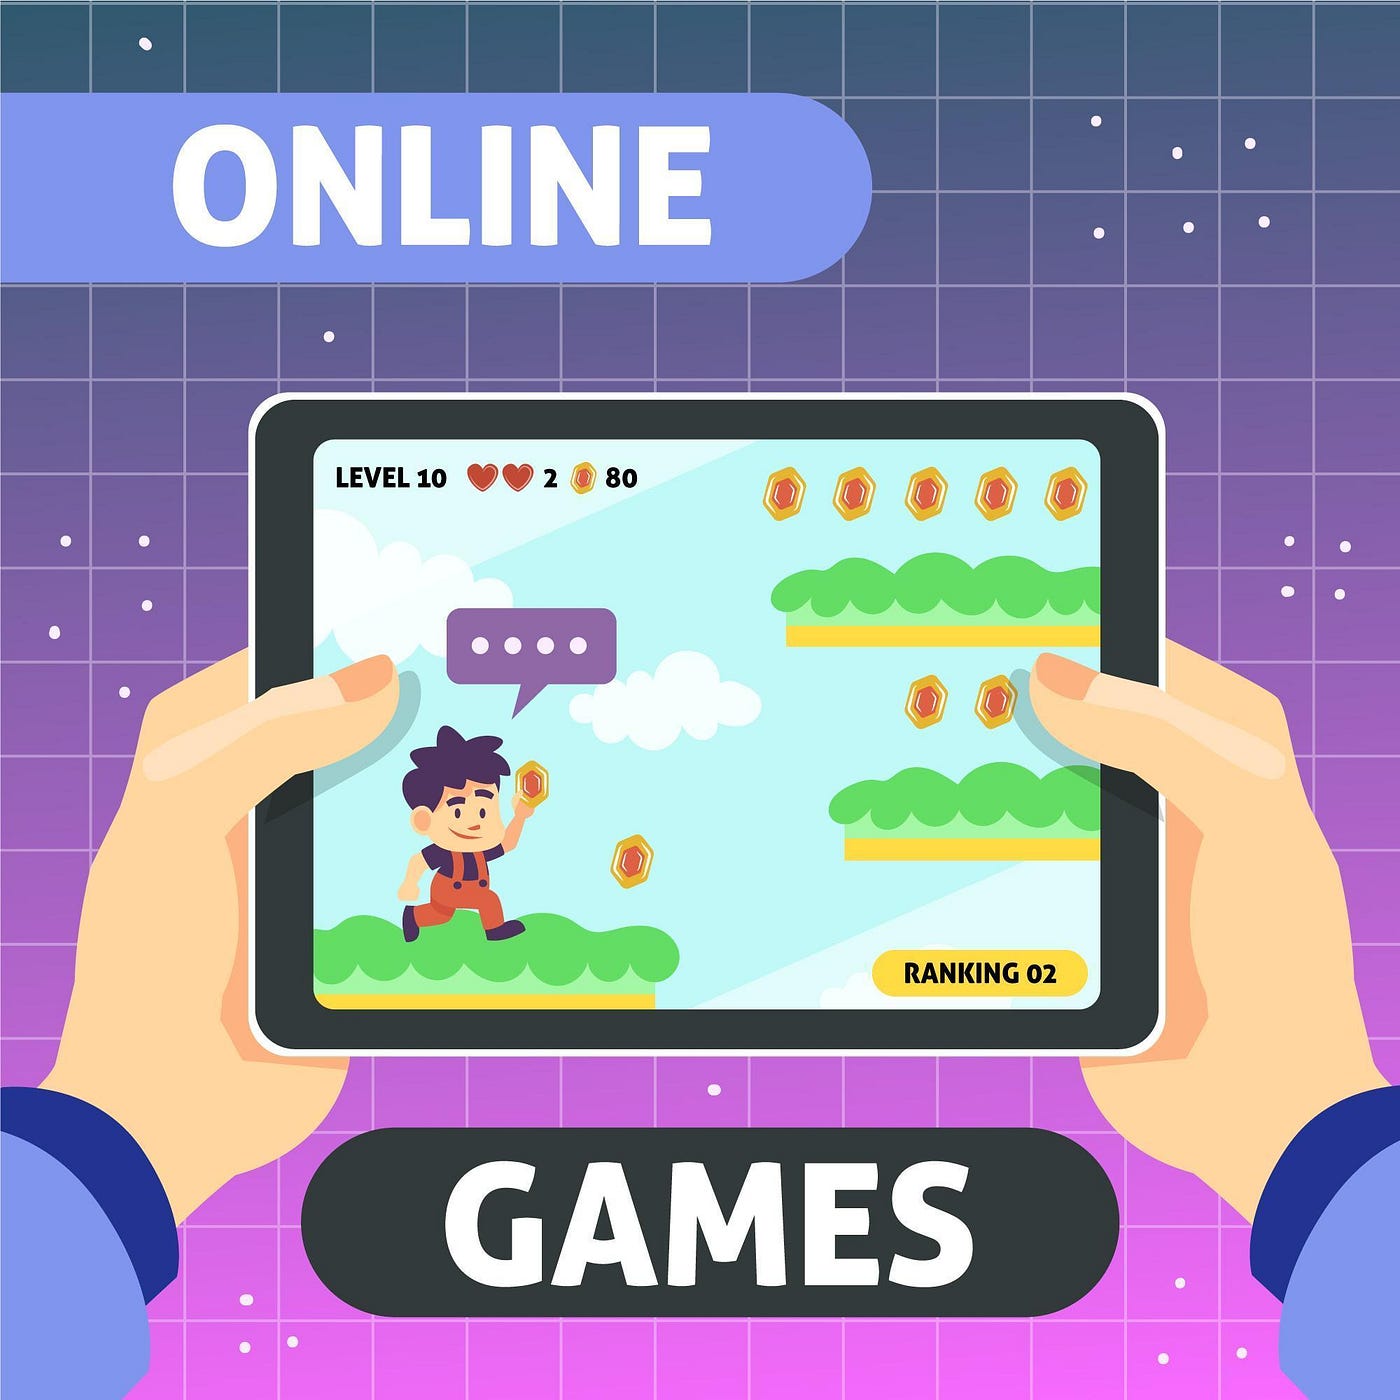 10 sites that let you play the best online games for free